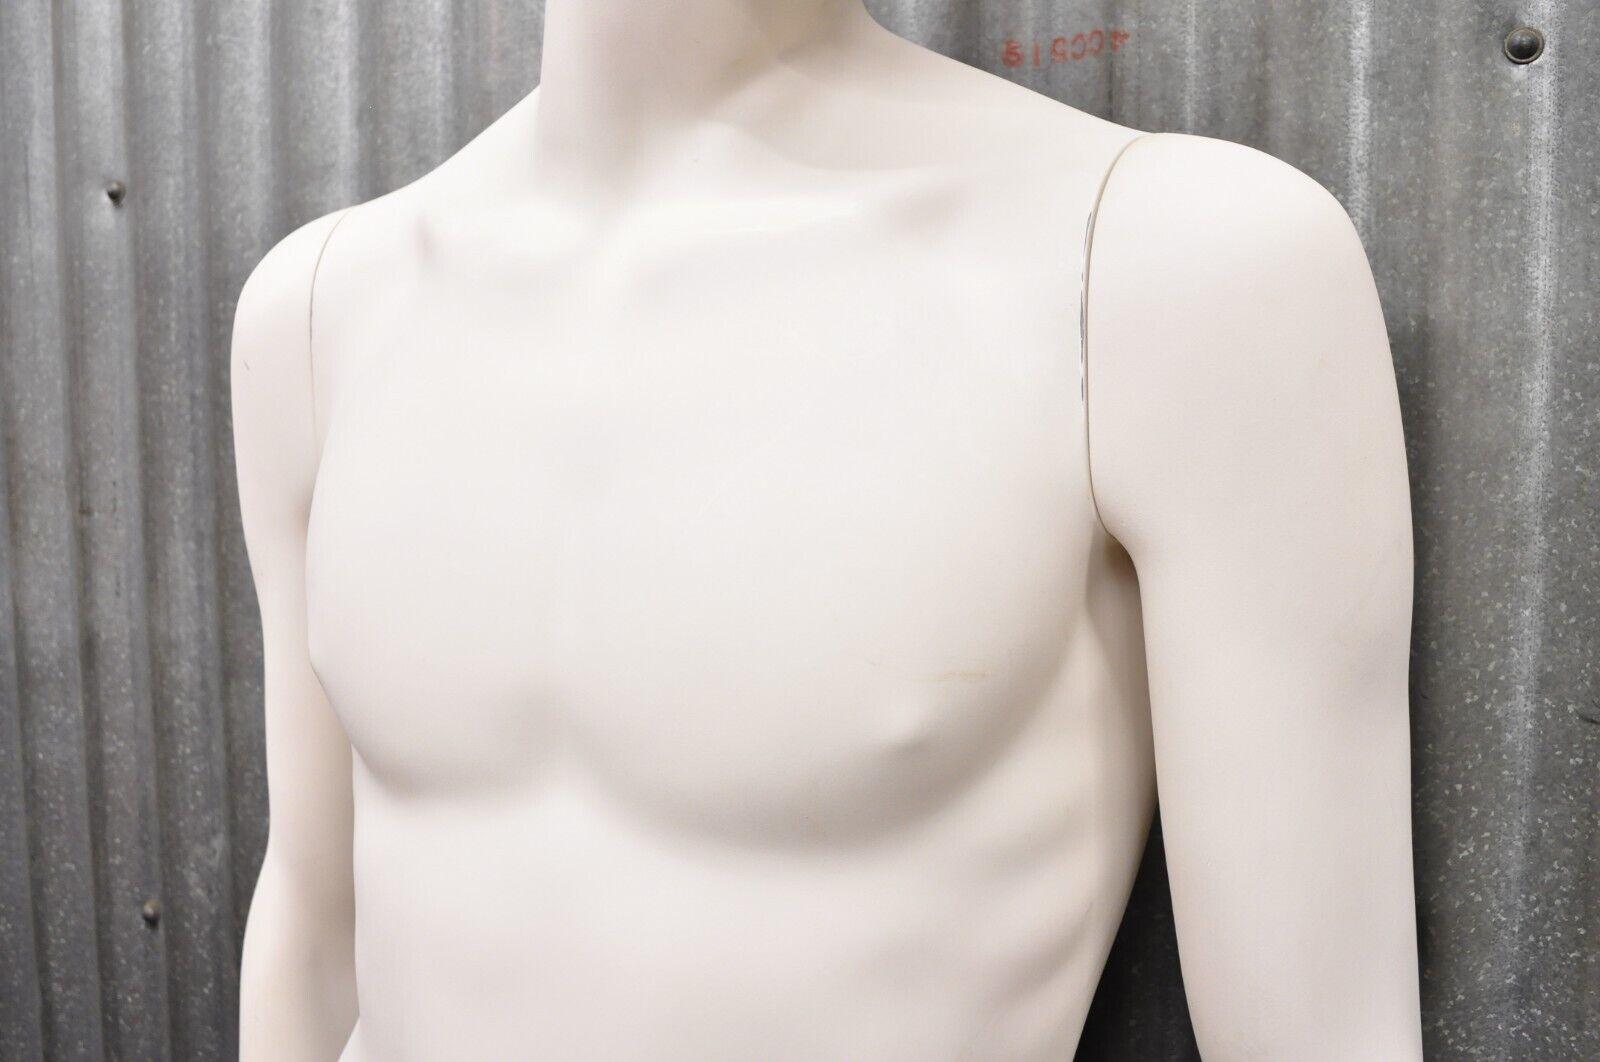 Male Fiberglass White Matte Finish Full Body Display Mannequin by Almax (A) In Good Condition For Sale In Philadelphia, PA